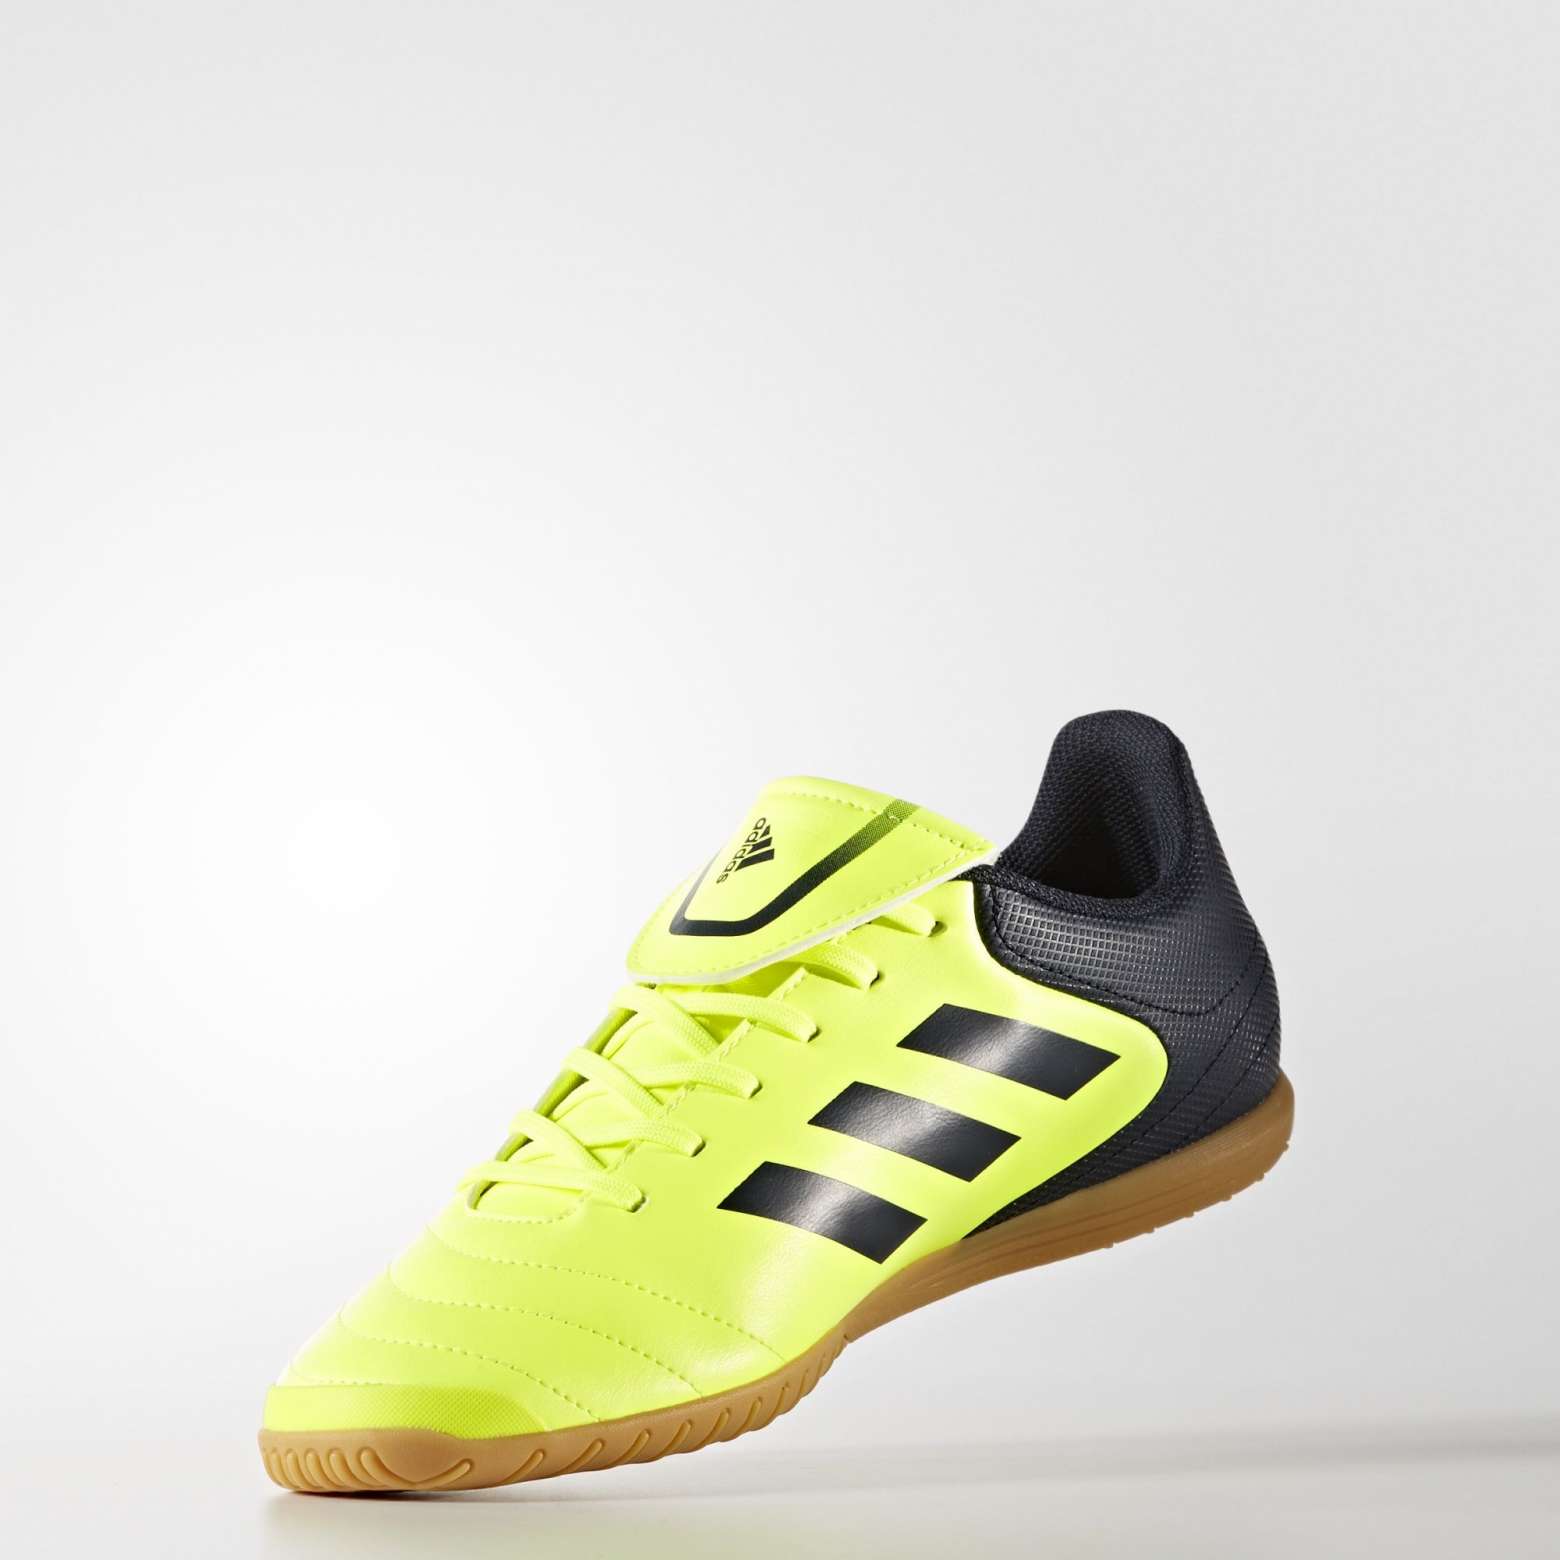  .  / ADIDAS Copa 17.4 IN S77151    